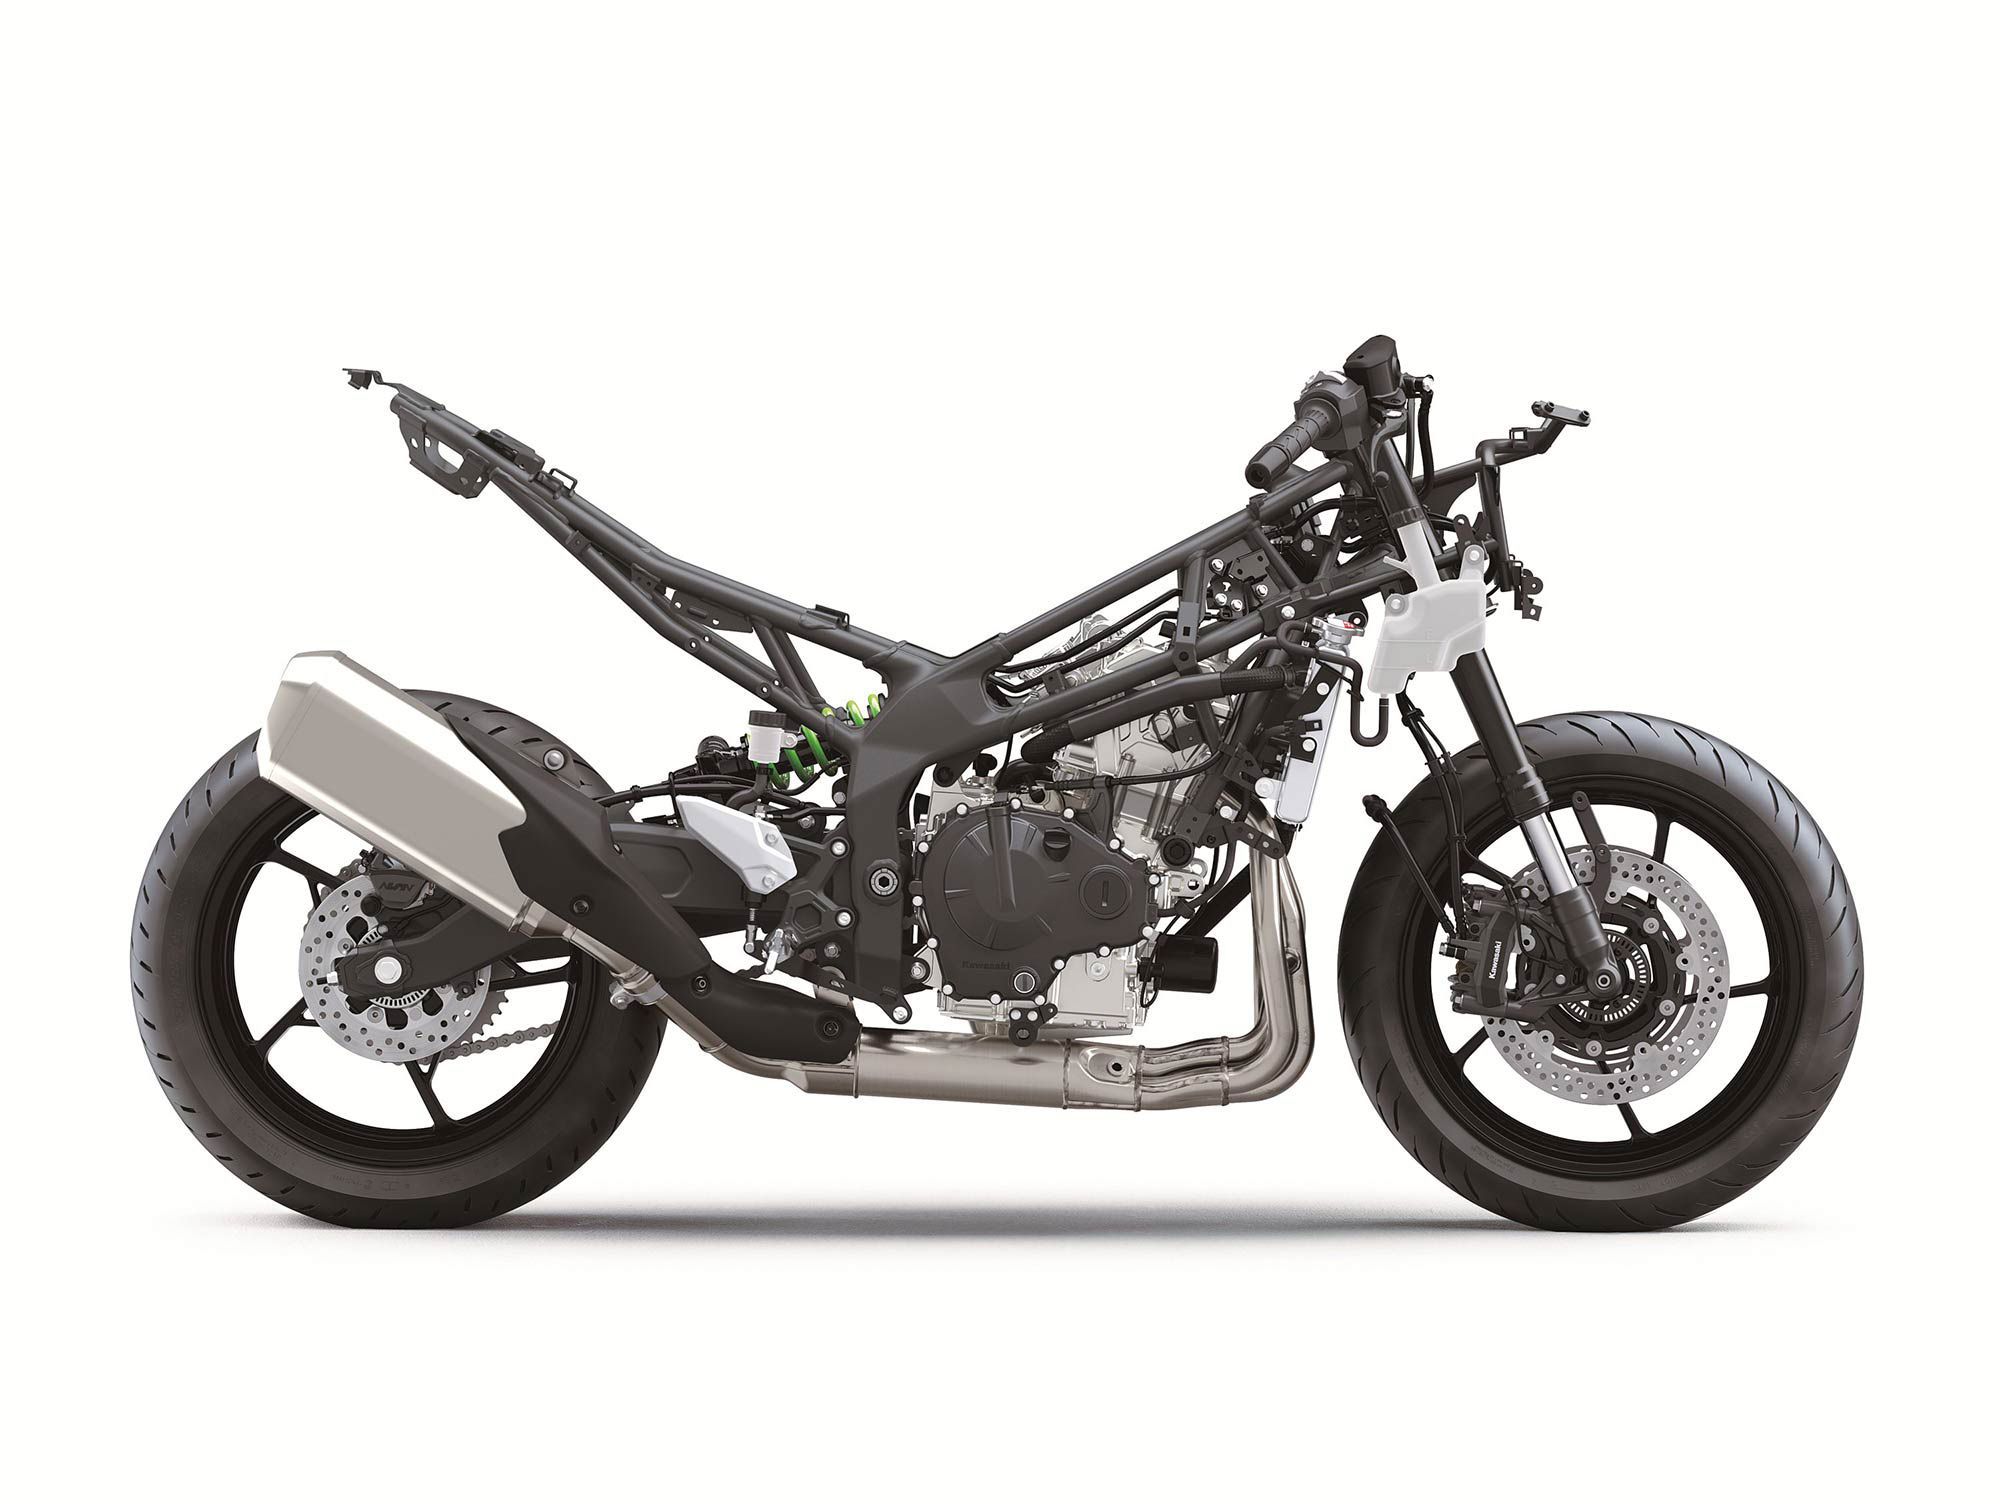 The Ninja ZX-4RR features a high-revving inline four engine hung inside a steel frame.